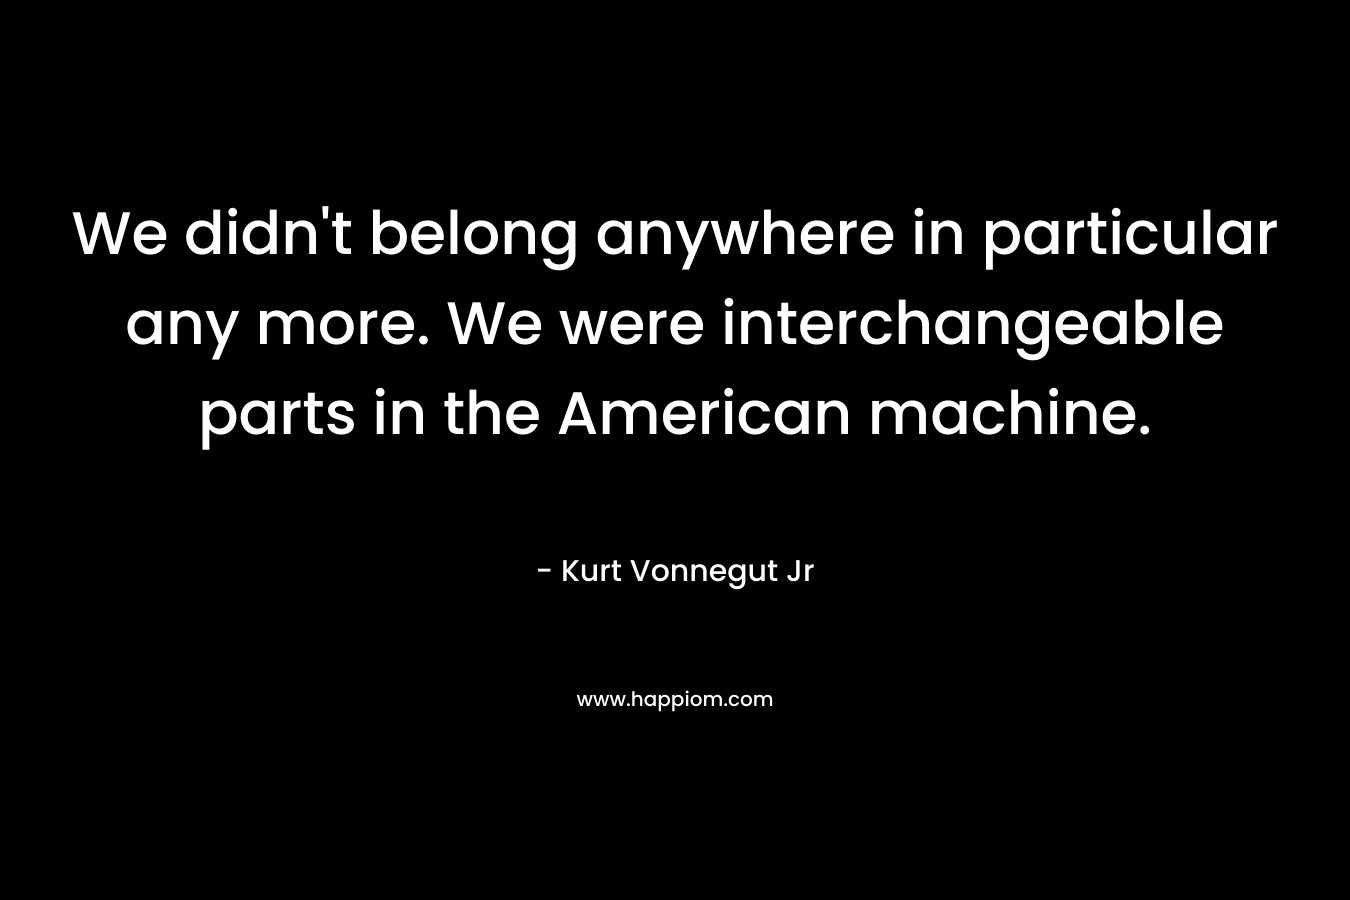 We didn't belong anywhere in particular any more. We were interchangeable parts in the American machine.